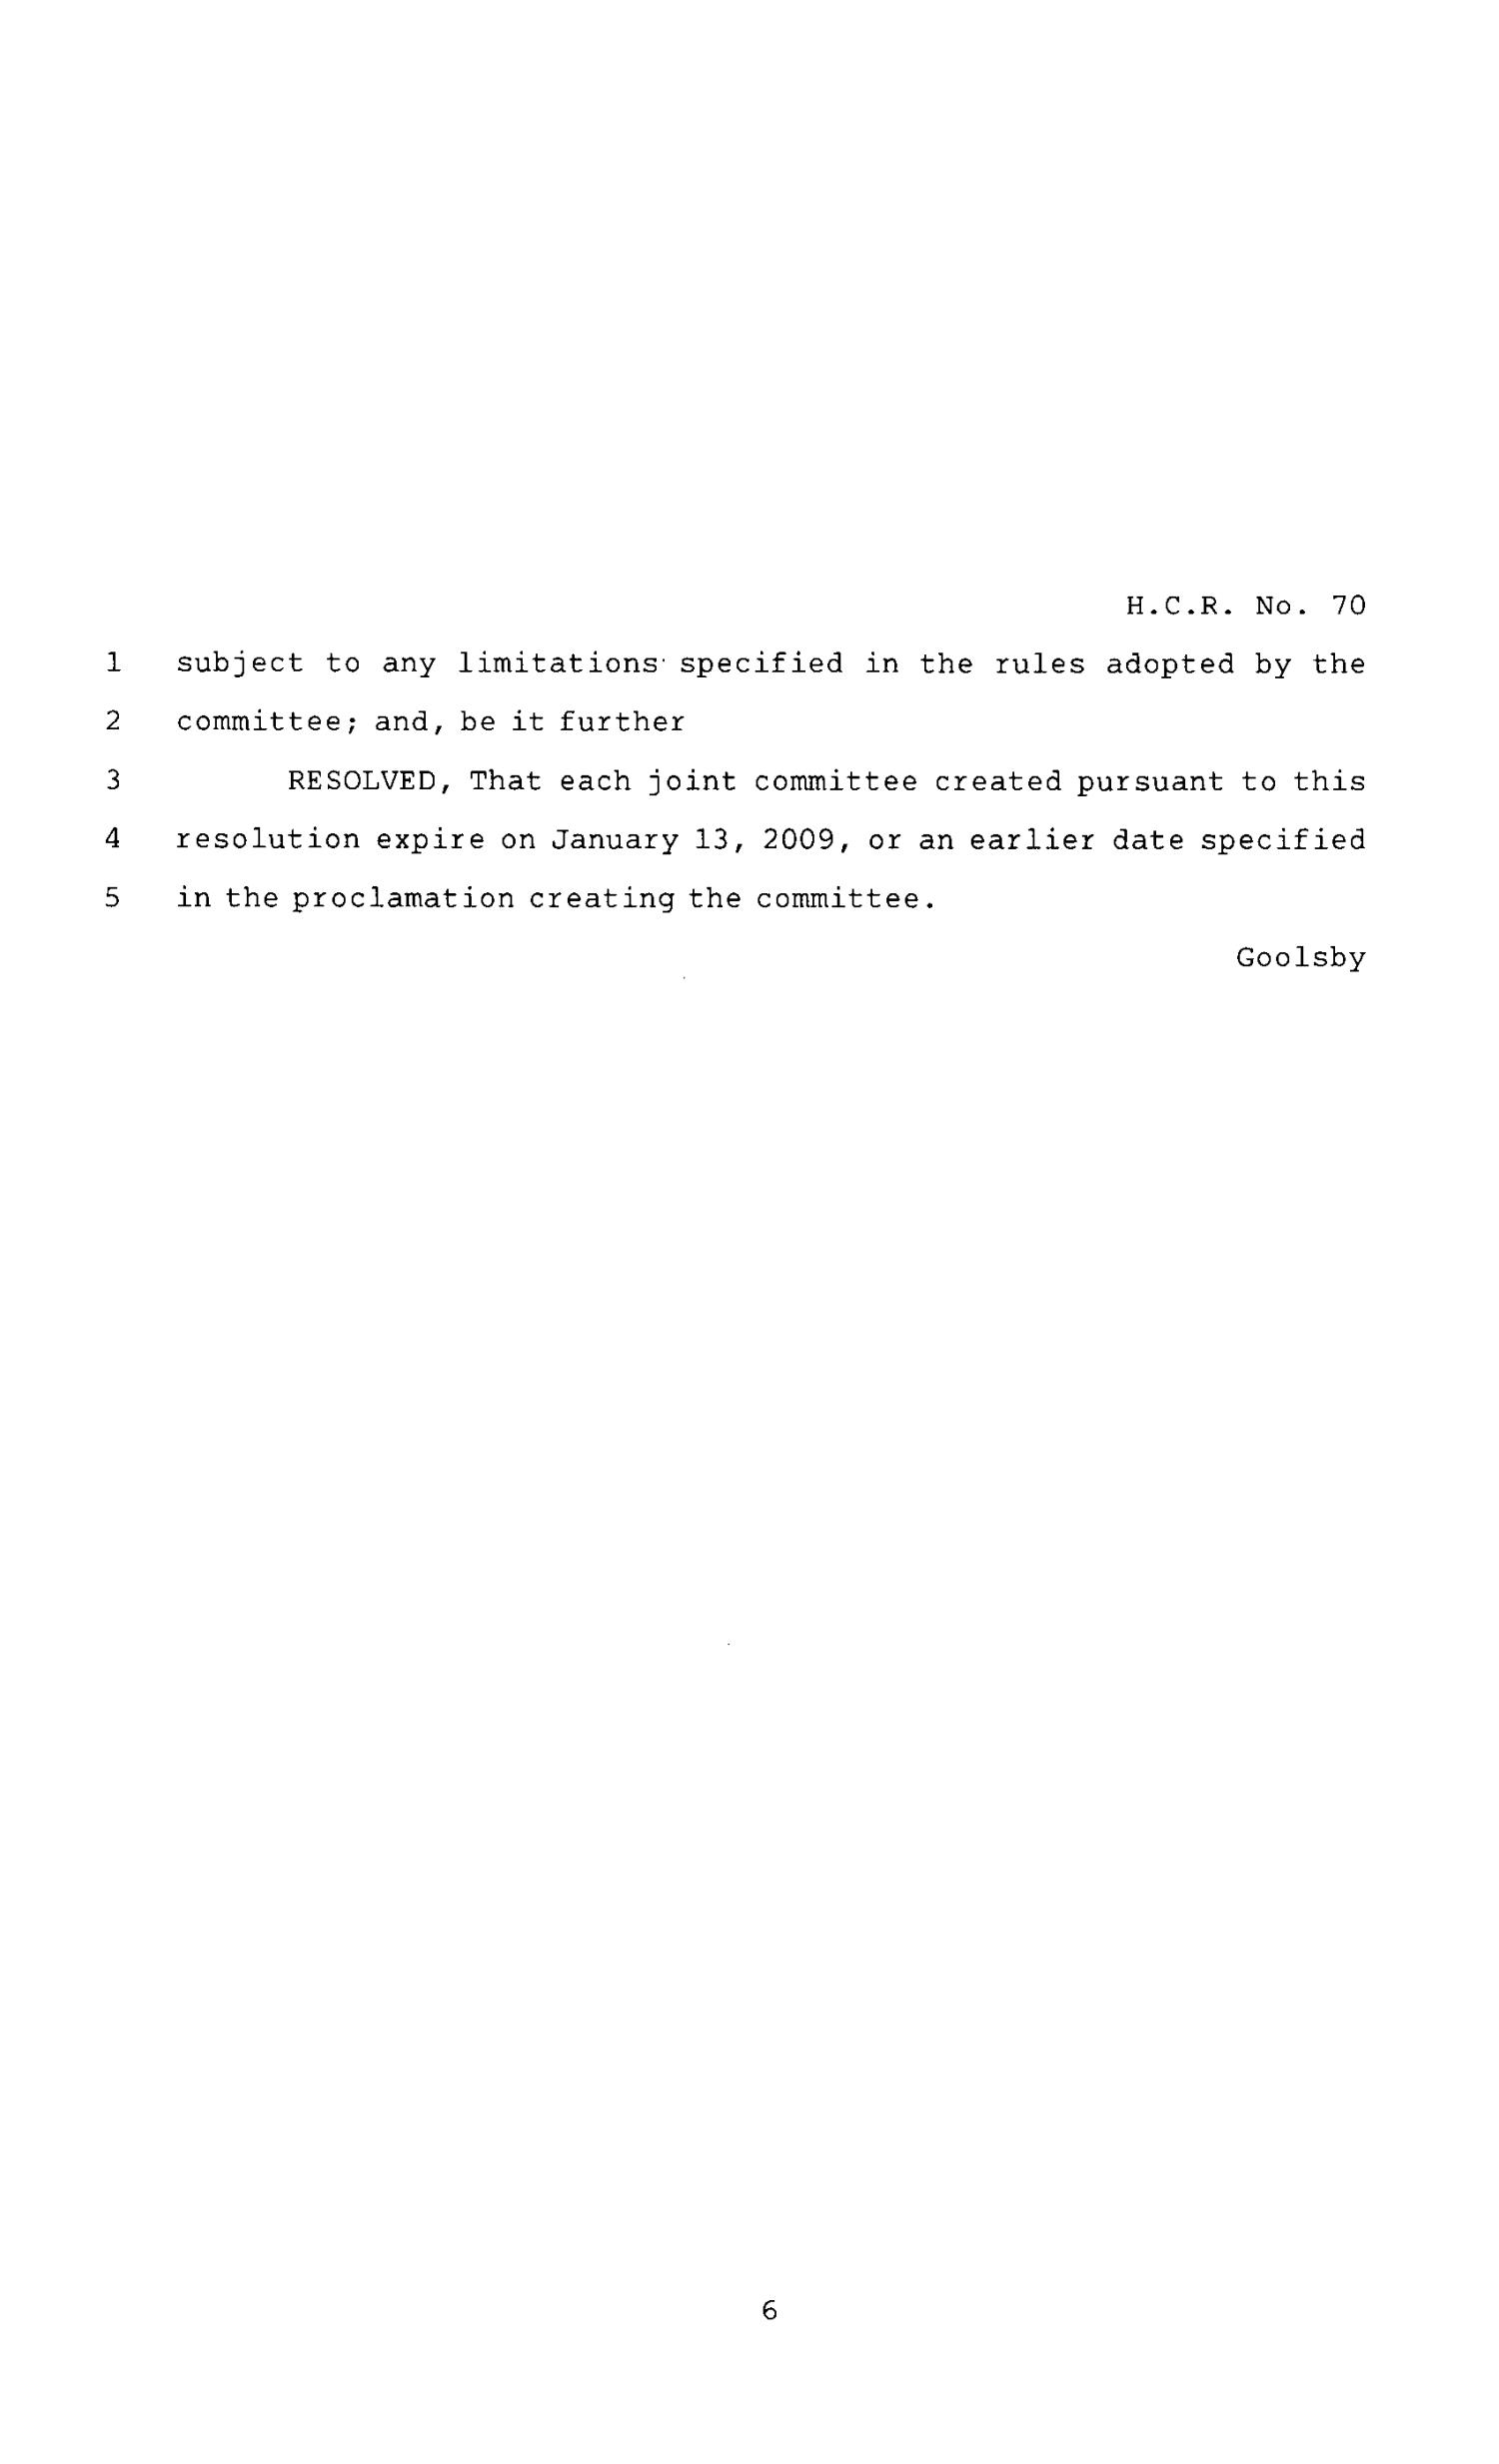 80th Texas Legislature, Regular Session, House Concurrent Resolution 70
                                                
                                                    [Sequence #]: 6 of 7
                                                